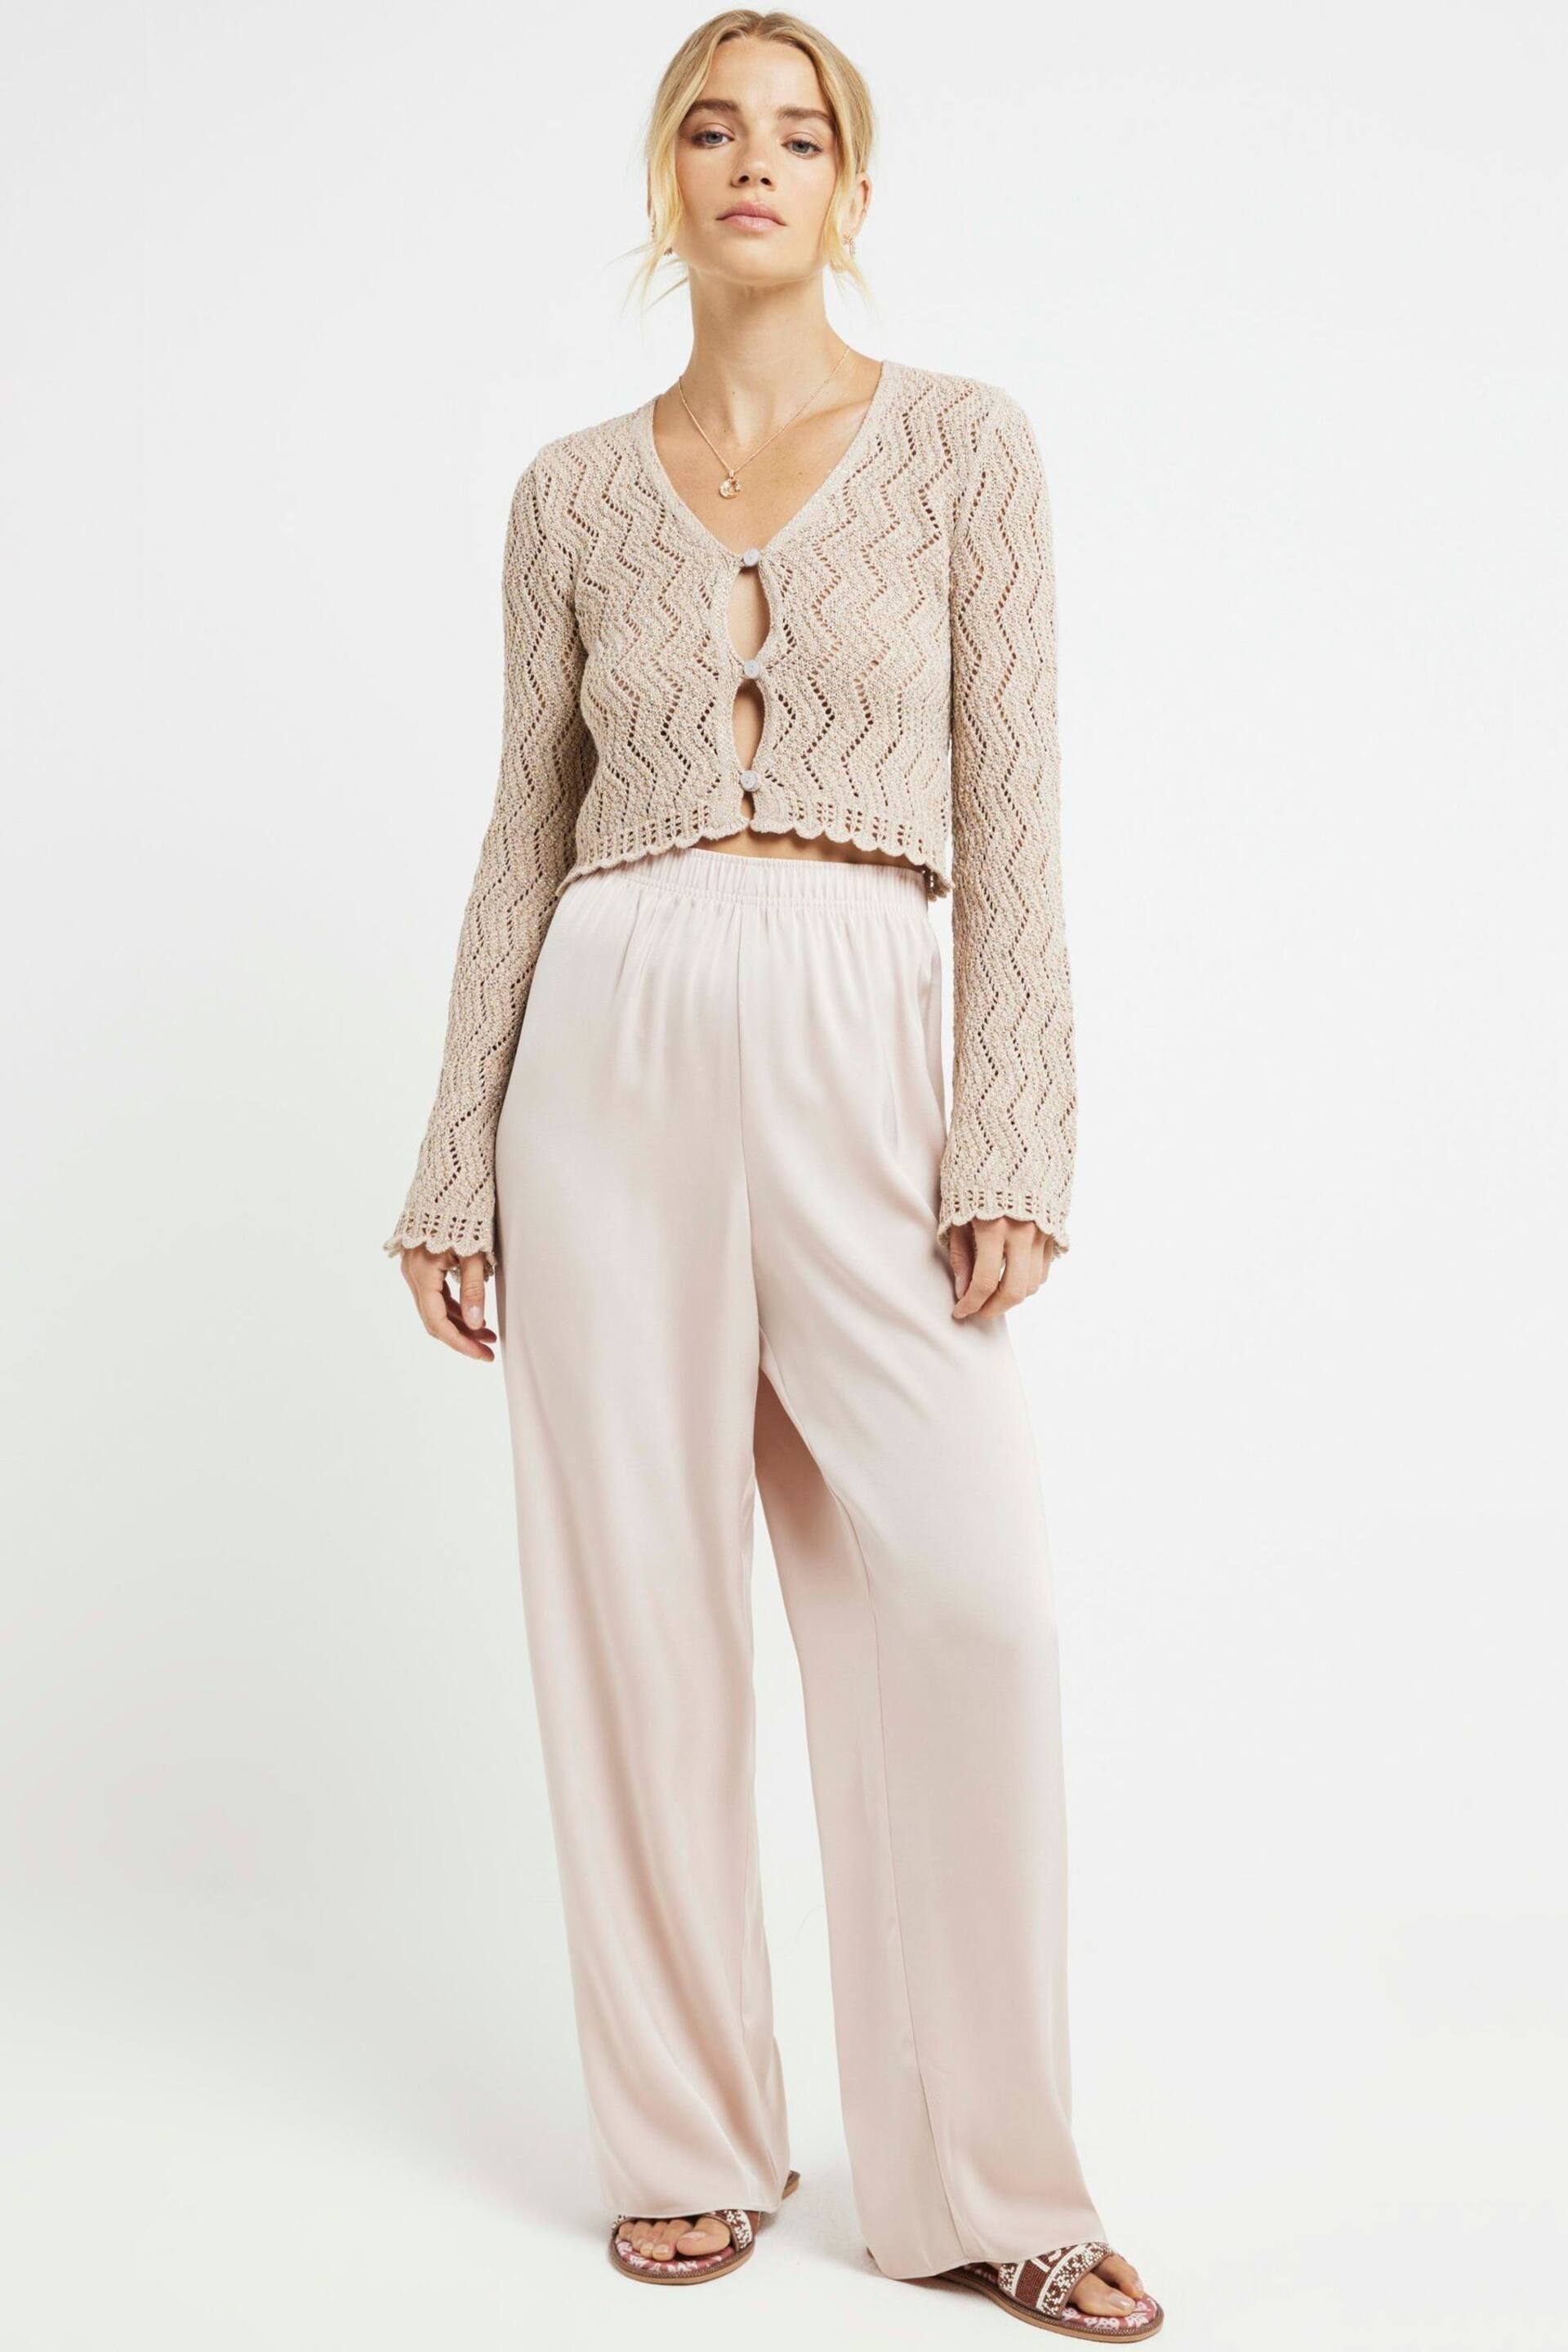 River Island Pink Satin Pull On Elasticated Trousers - Image 4 of 4